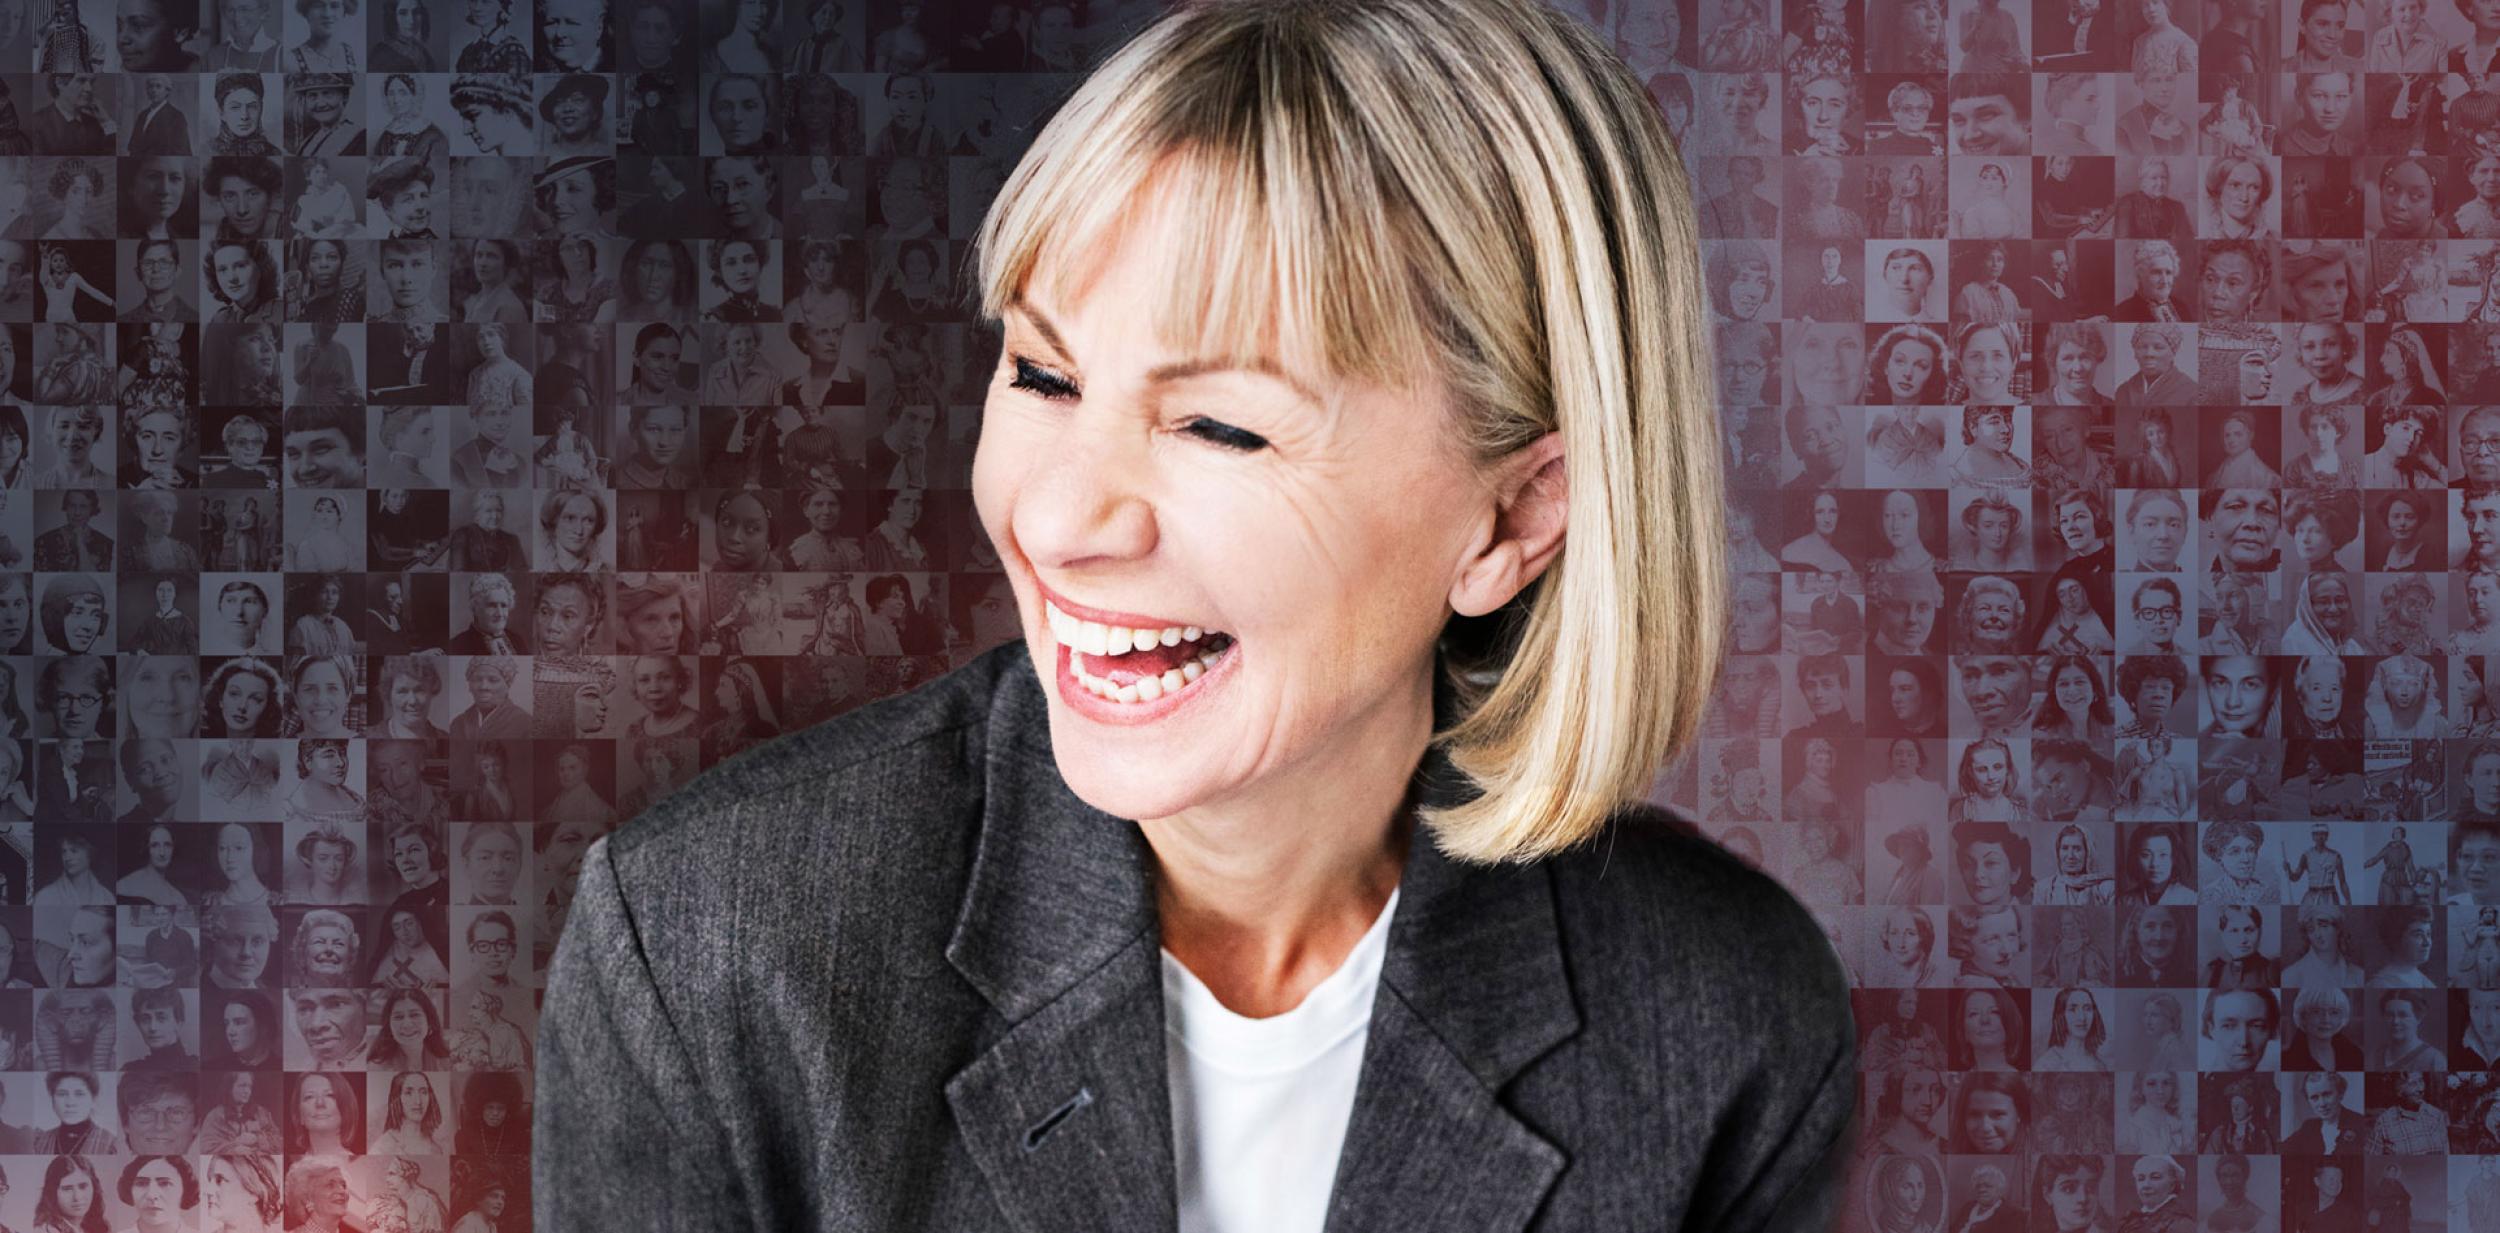 Kate Mosse laughing and looking to the side in front of lots of black and white photos of women